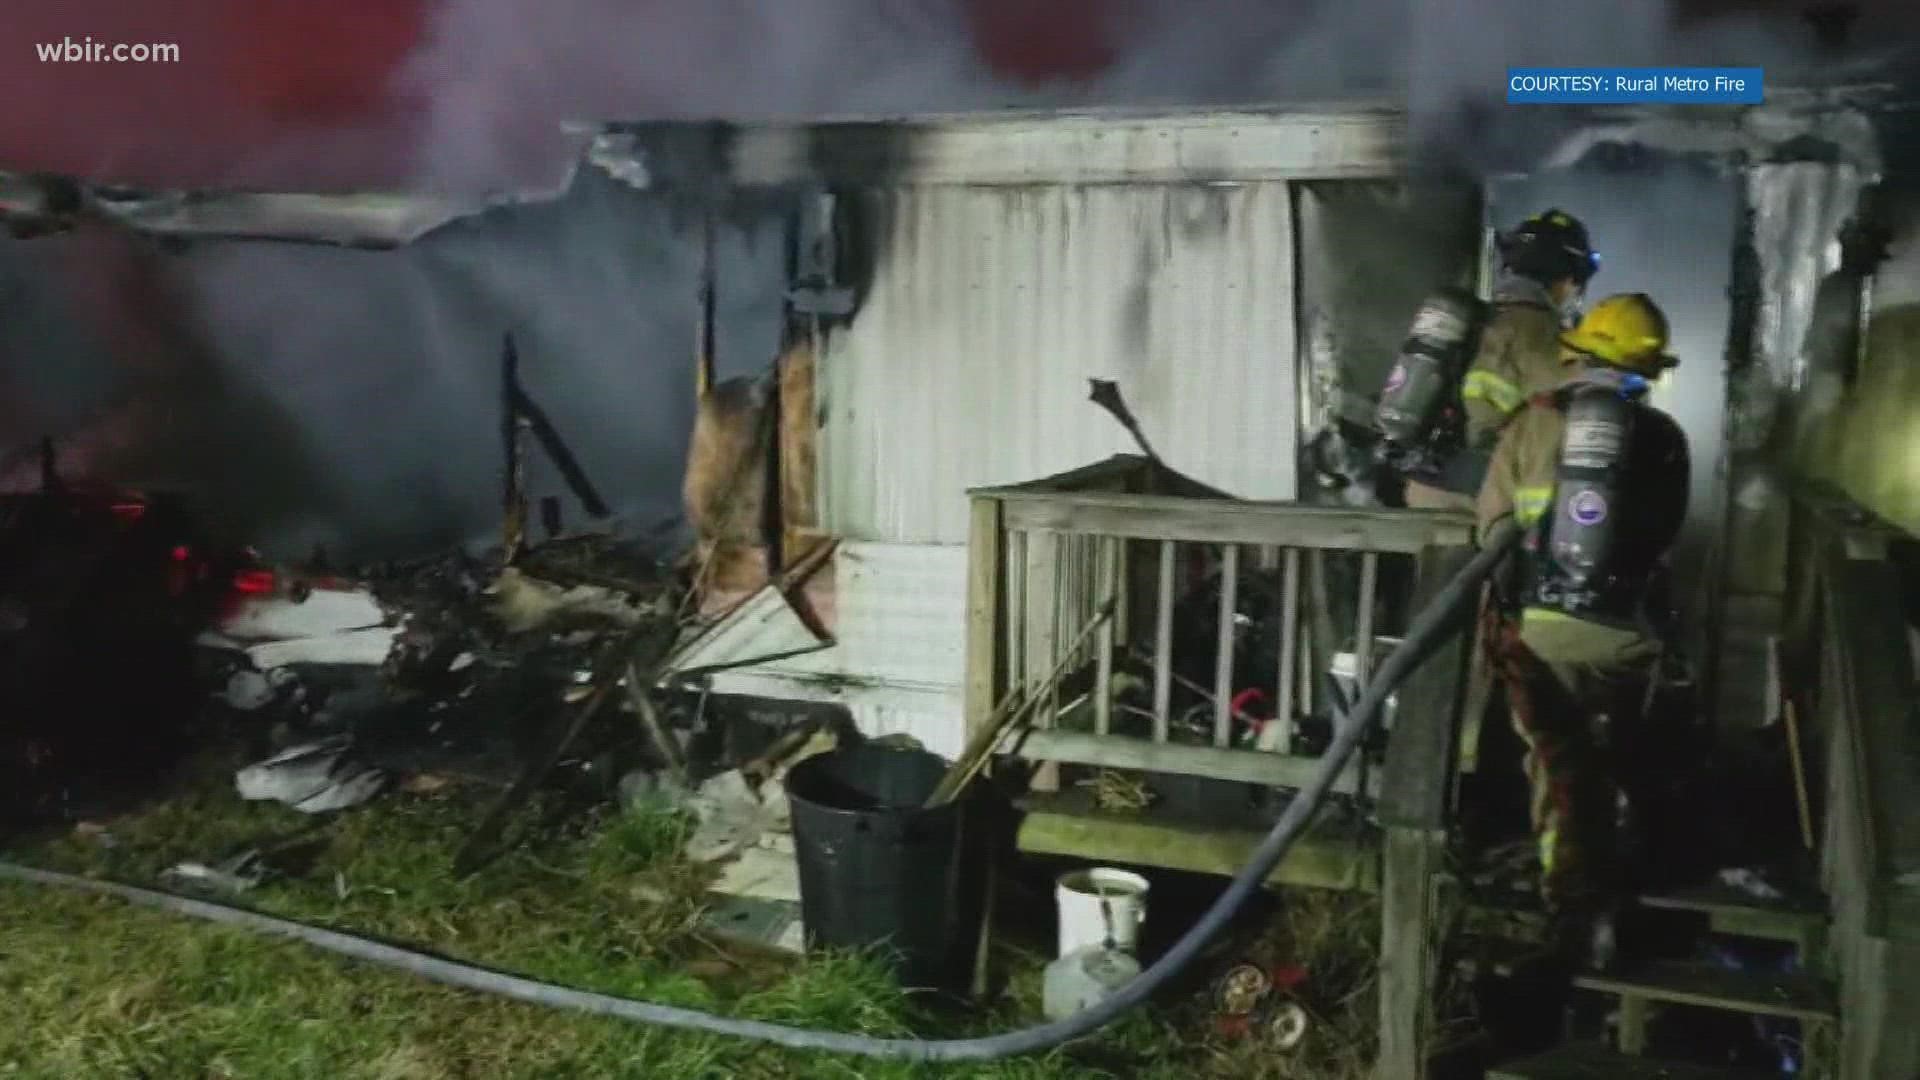 The fire occured around 4:00 a.m. in East Knox County.